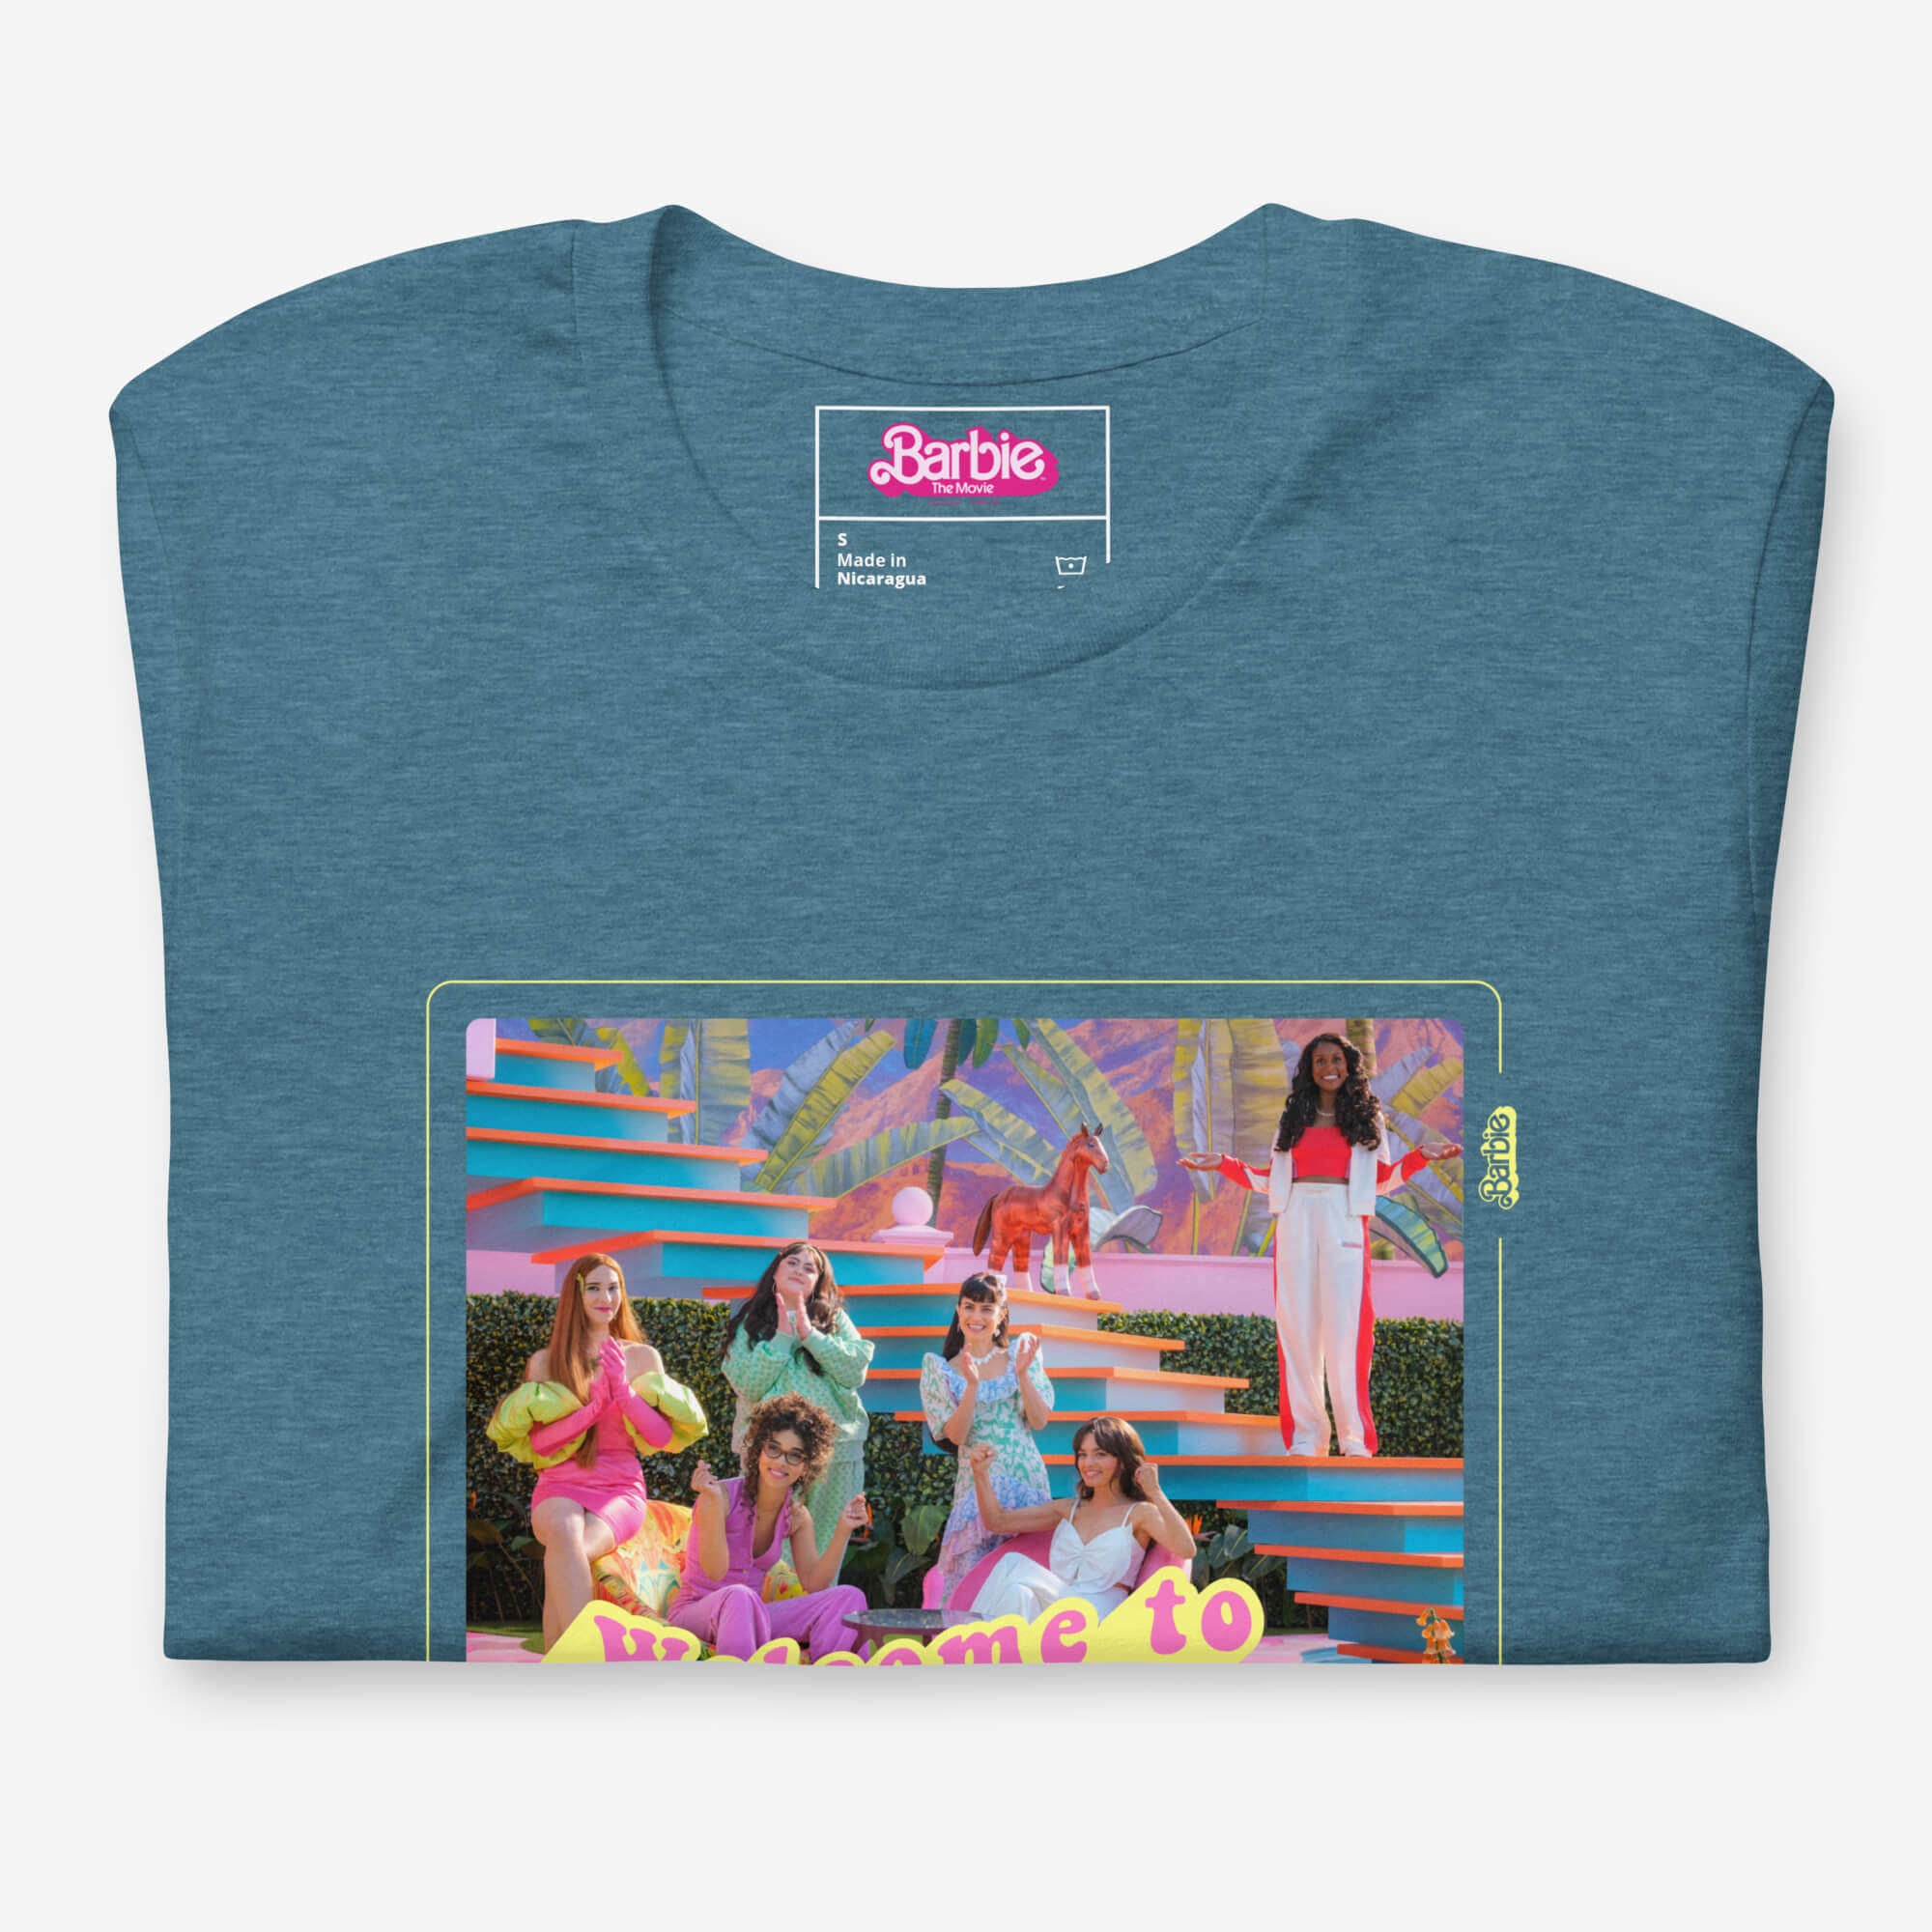 Welcome to Barbie Land T-shirt – Barbie The Movie – Mattel Creations